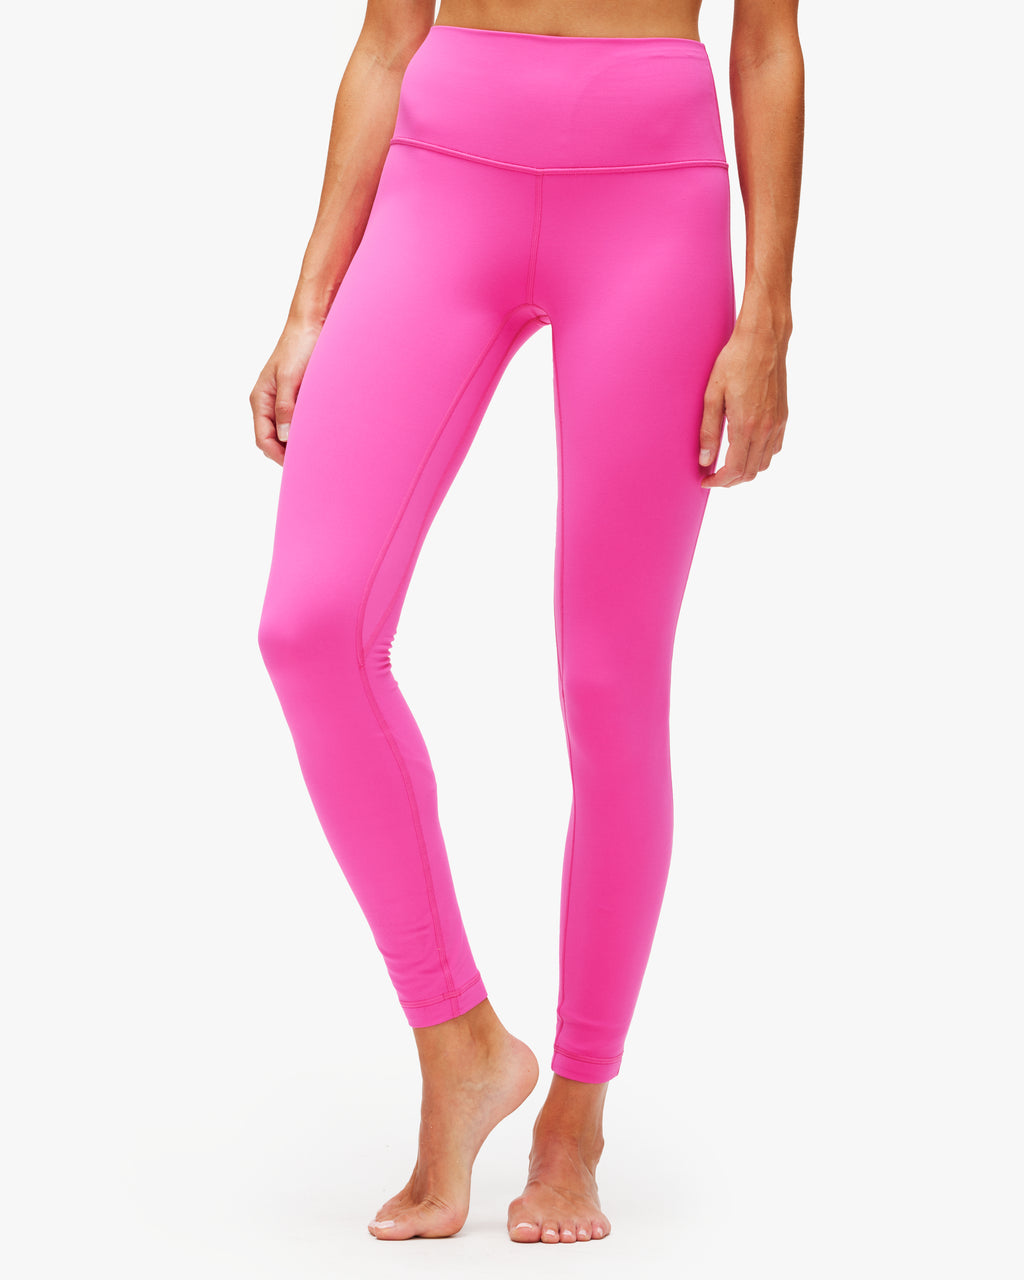 NWT Lululemon Align Pant Size 2 Pink Puff 28 Double Lined Sold